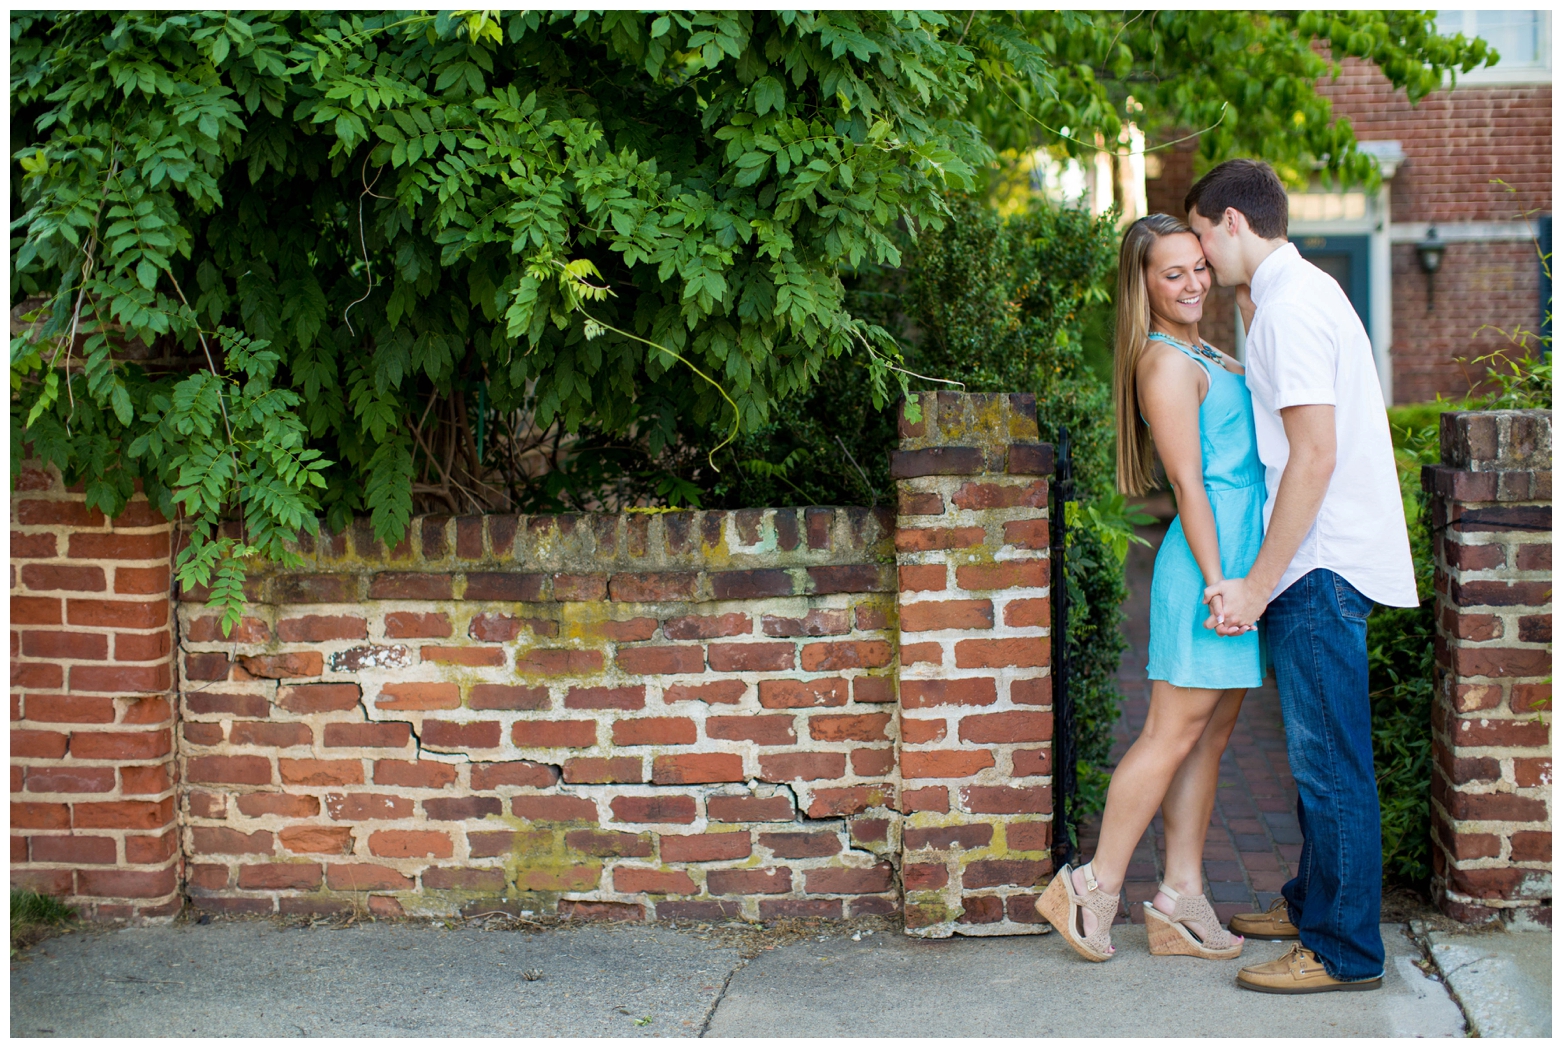 View More: http://hopetaylorphotographyphotos.pass.us/paige-and-trevor